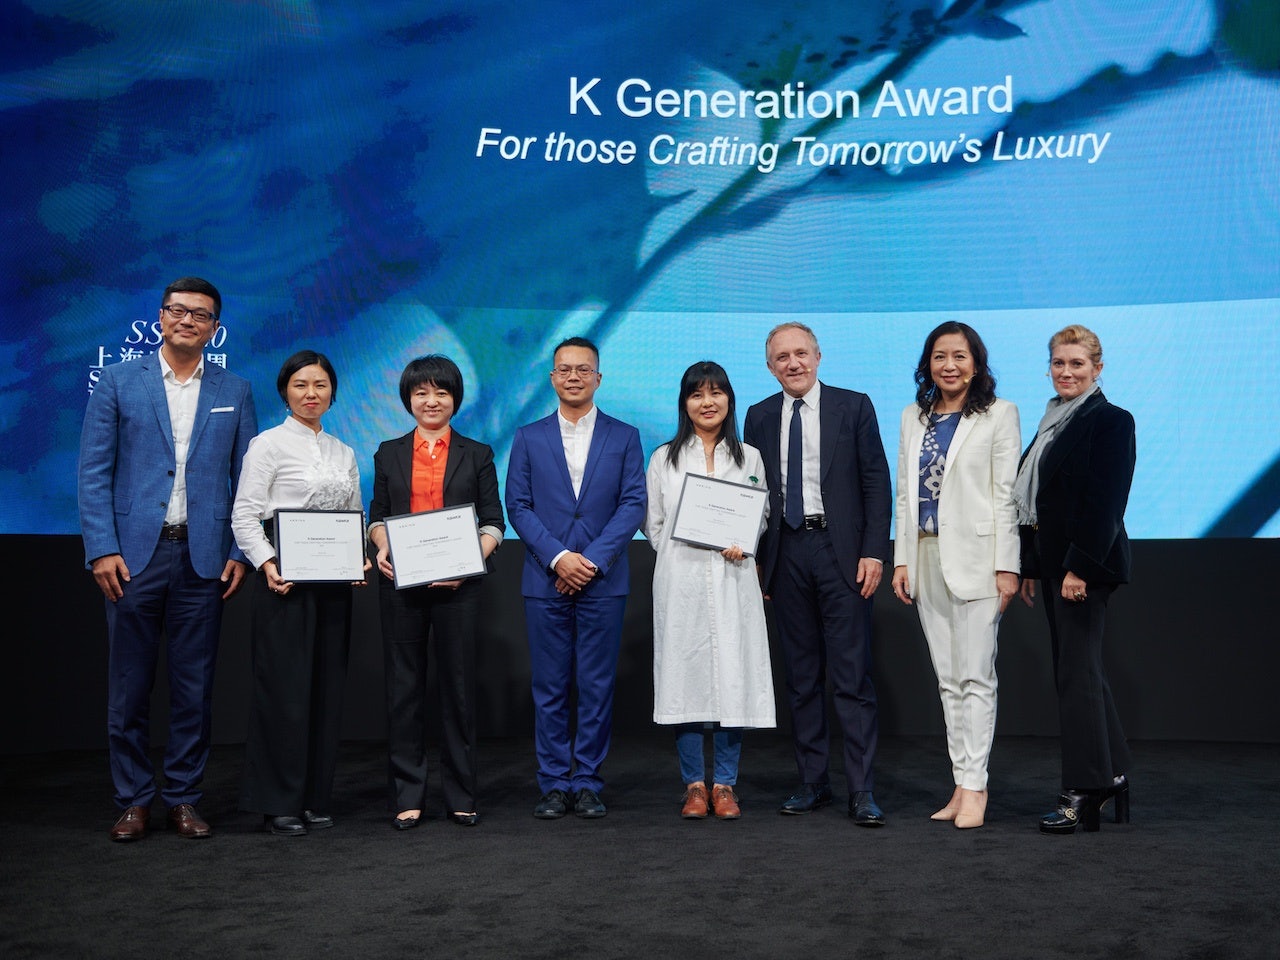 At the conference, Kering recognized three Chinese startups that were creatively addressing sustainability challenges in the textile value chain: Melephant, Heyuan, and FeiLiu Technology. They also invited pivotal thought leaders across many industries to attend. Courtesy Photo.  